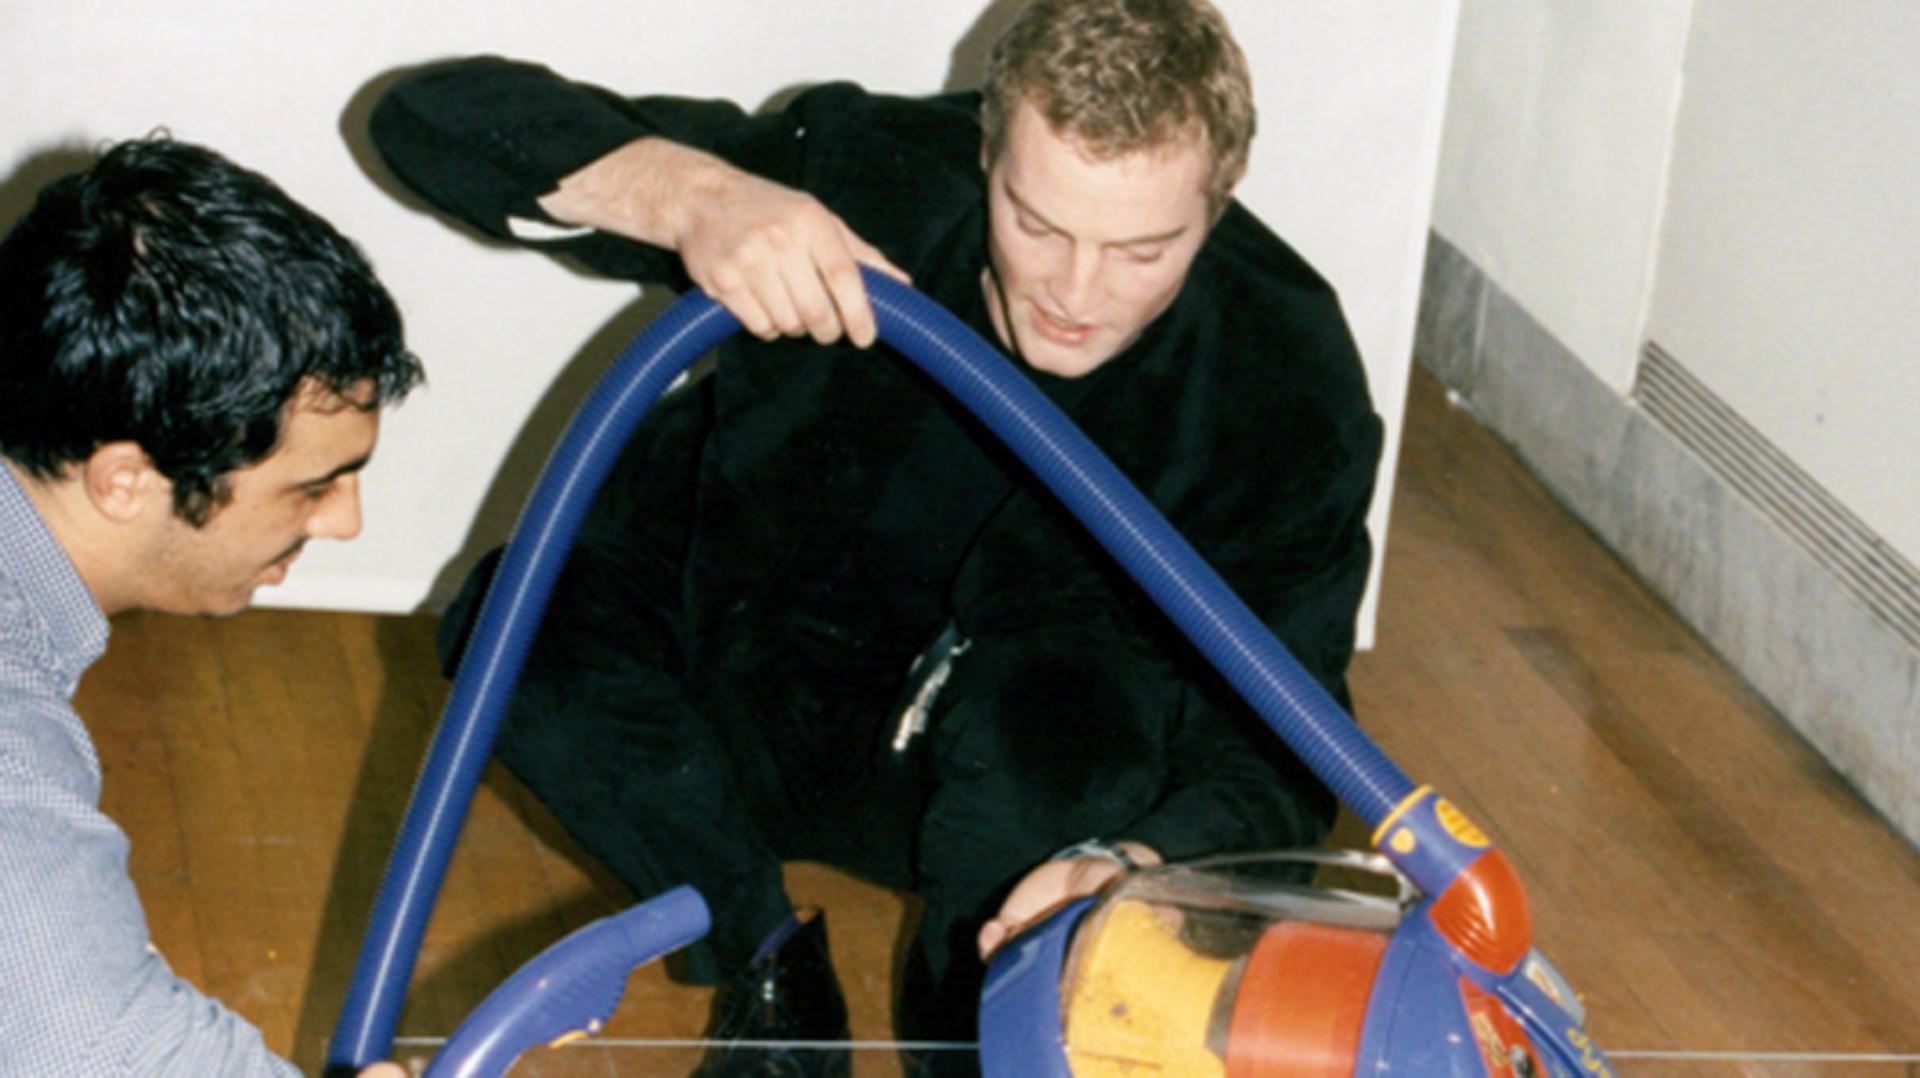 Jake Dyson crouched demonstrating a colourful DC02 vacuum at the Design Museum